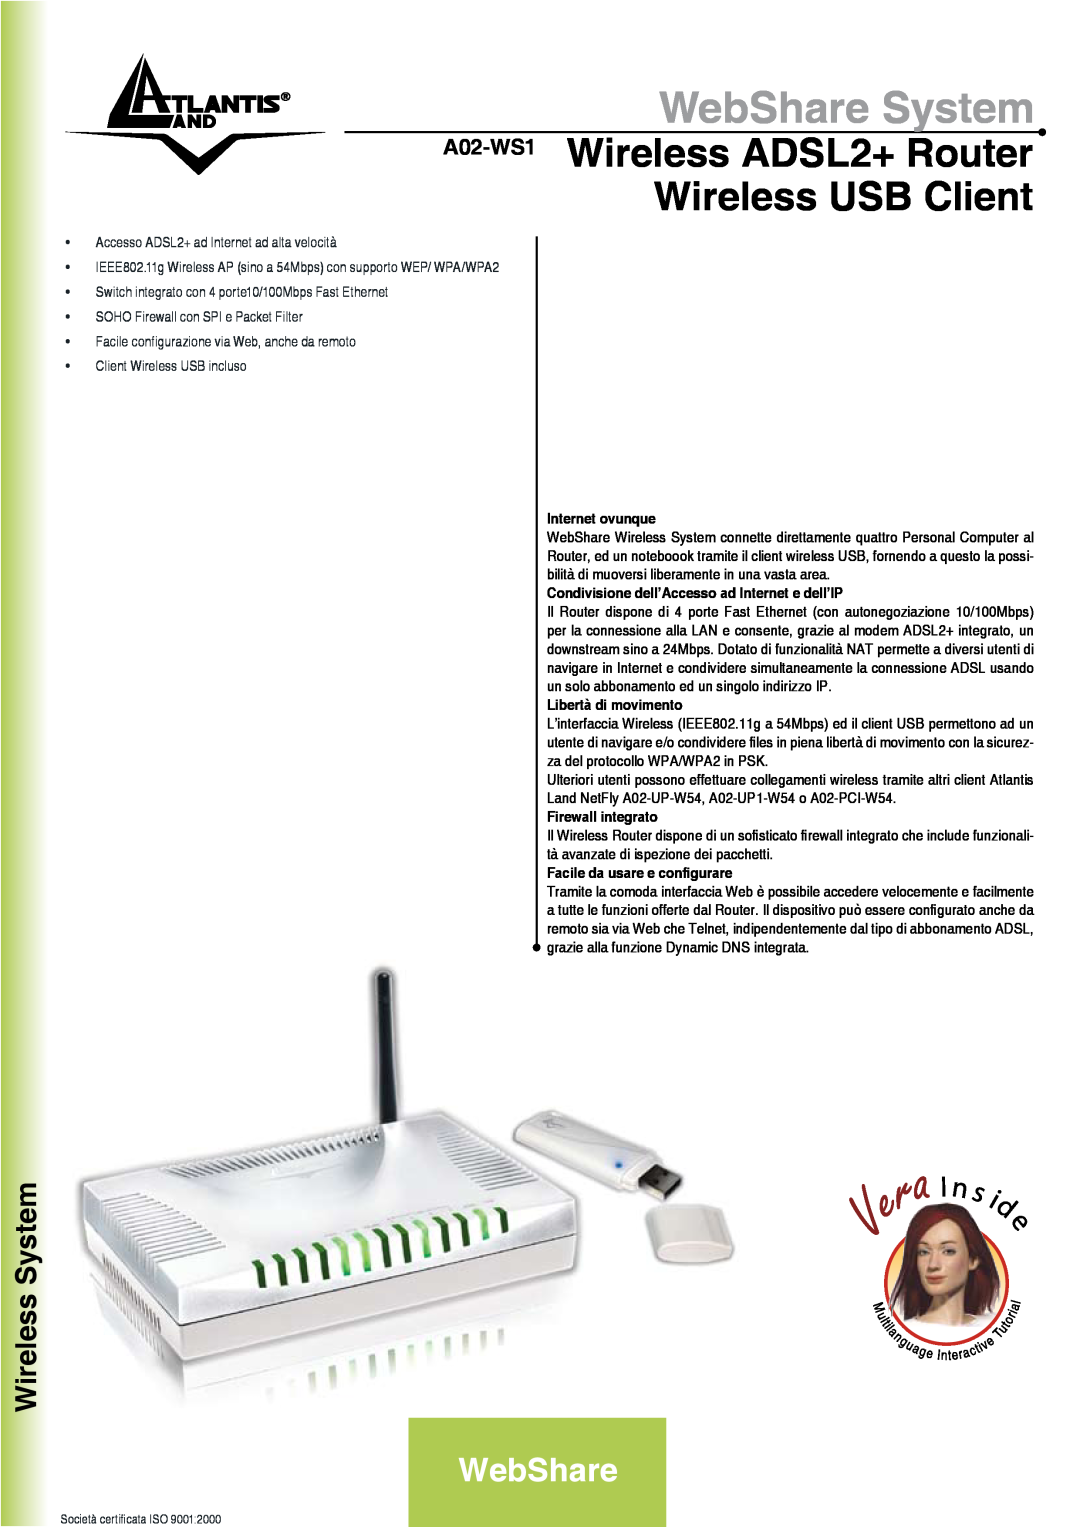 Atlantis Land manual WebShare System, A02-WS1 Wireless ADSL2+ Router Wireless USB Client, Client Wireless USB incluso 